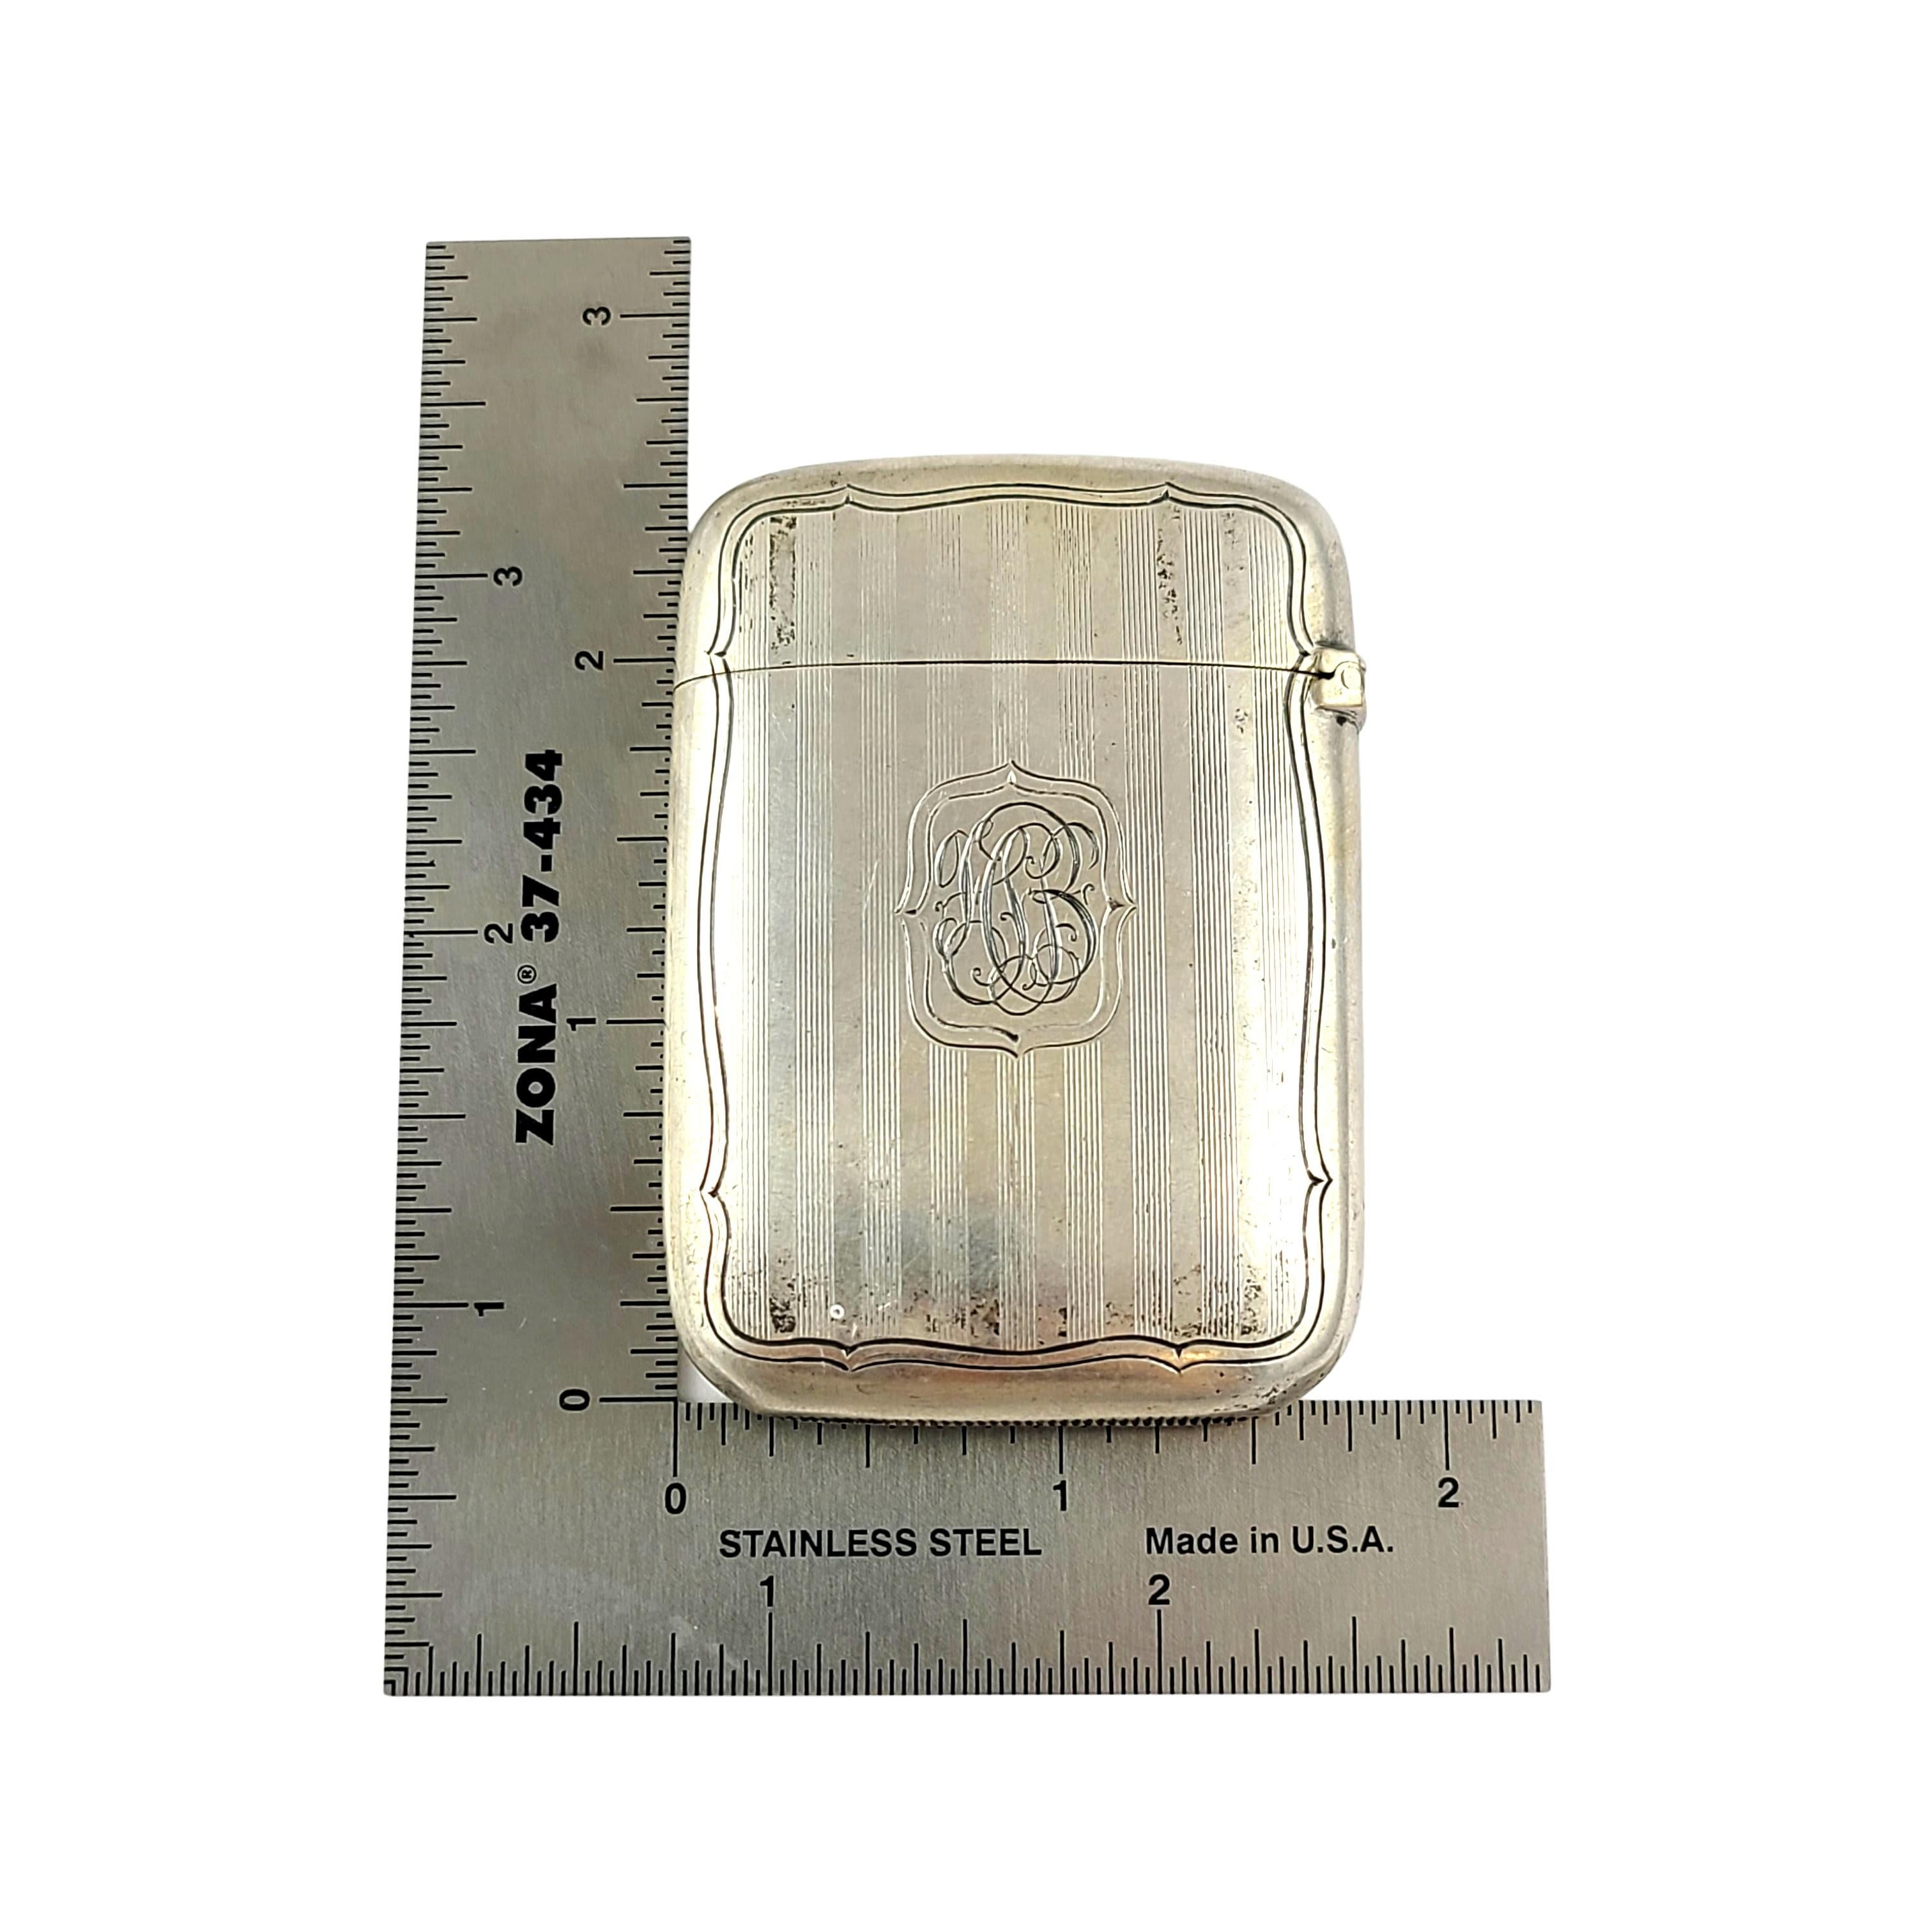 R Wallace & Sons Mfg Co Sterling Silver Match Safe/Vesta Case with Monogram 2